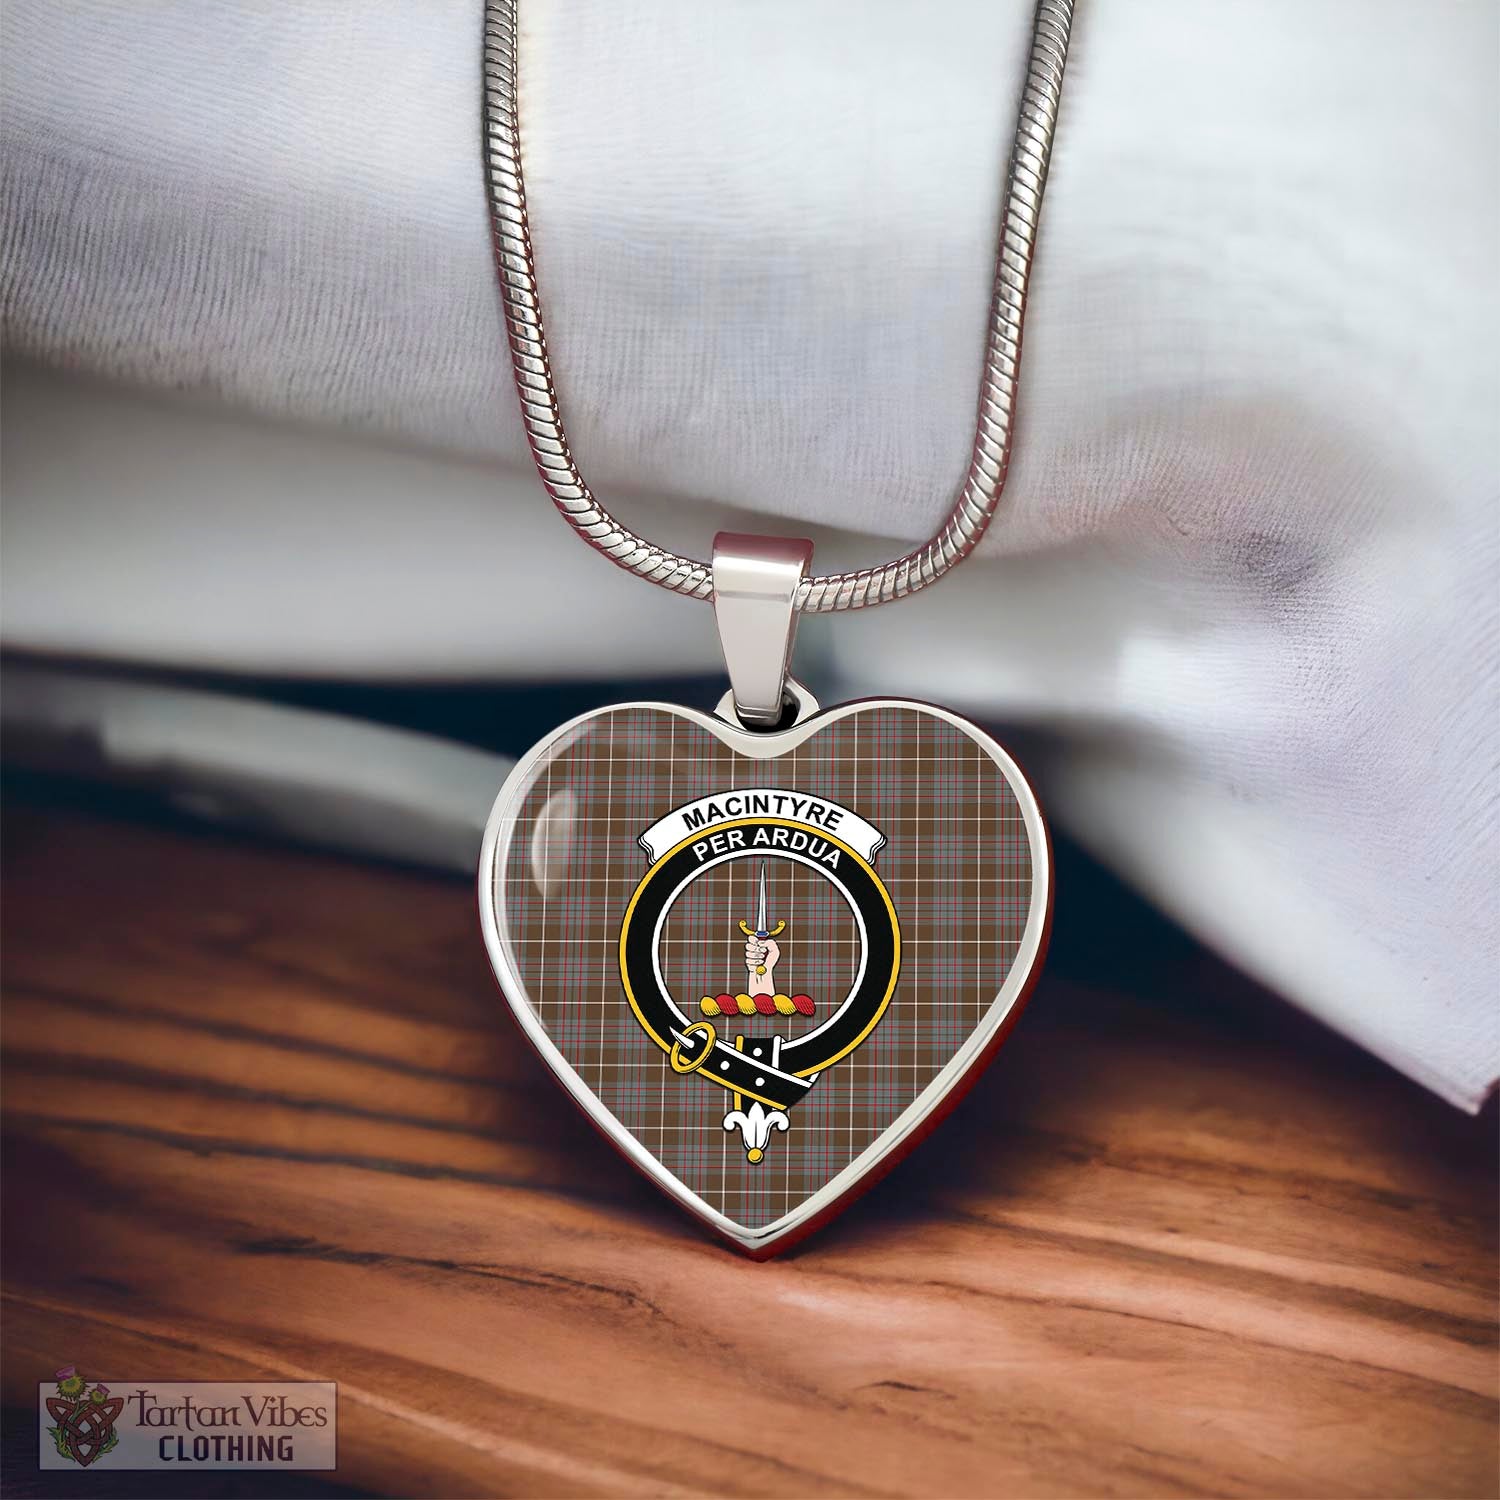 Tartan Vibes Clothing MacIntyre Hunting Weathered Tartan Heart Necklace with Family Crest